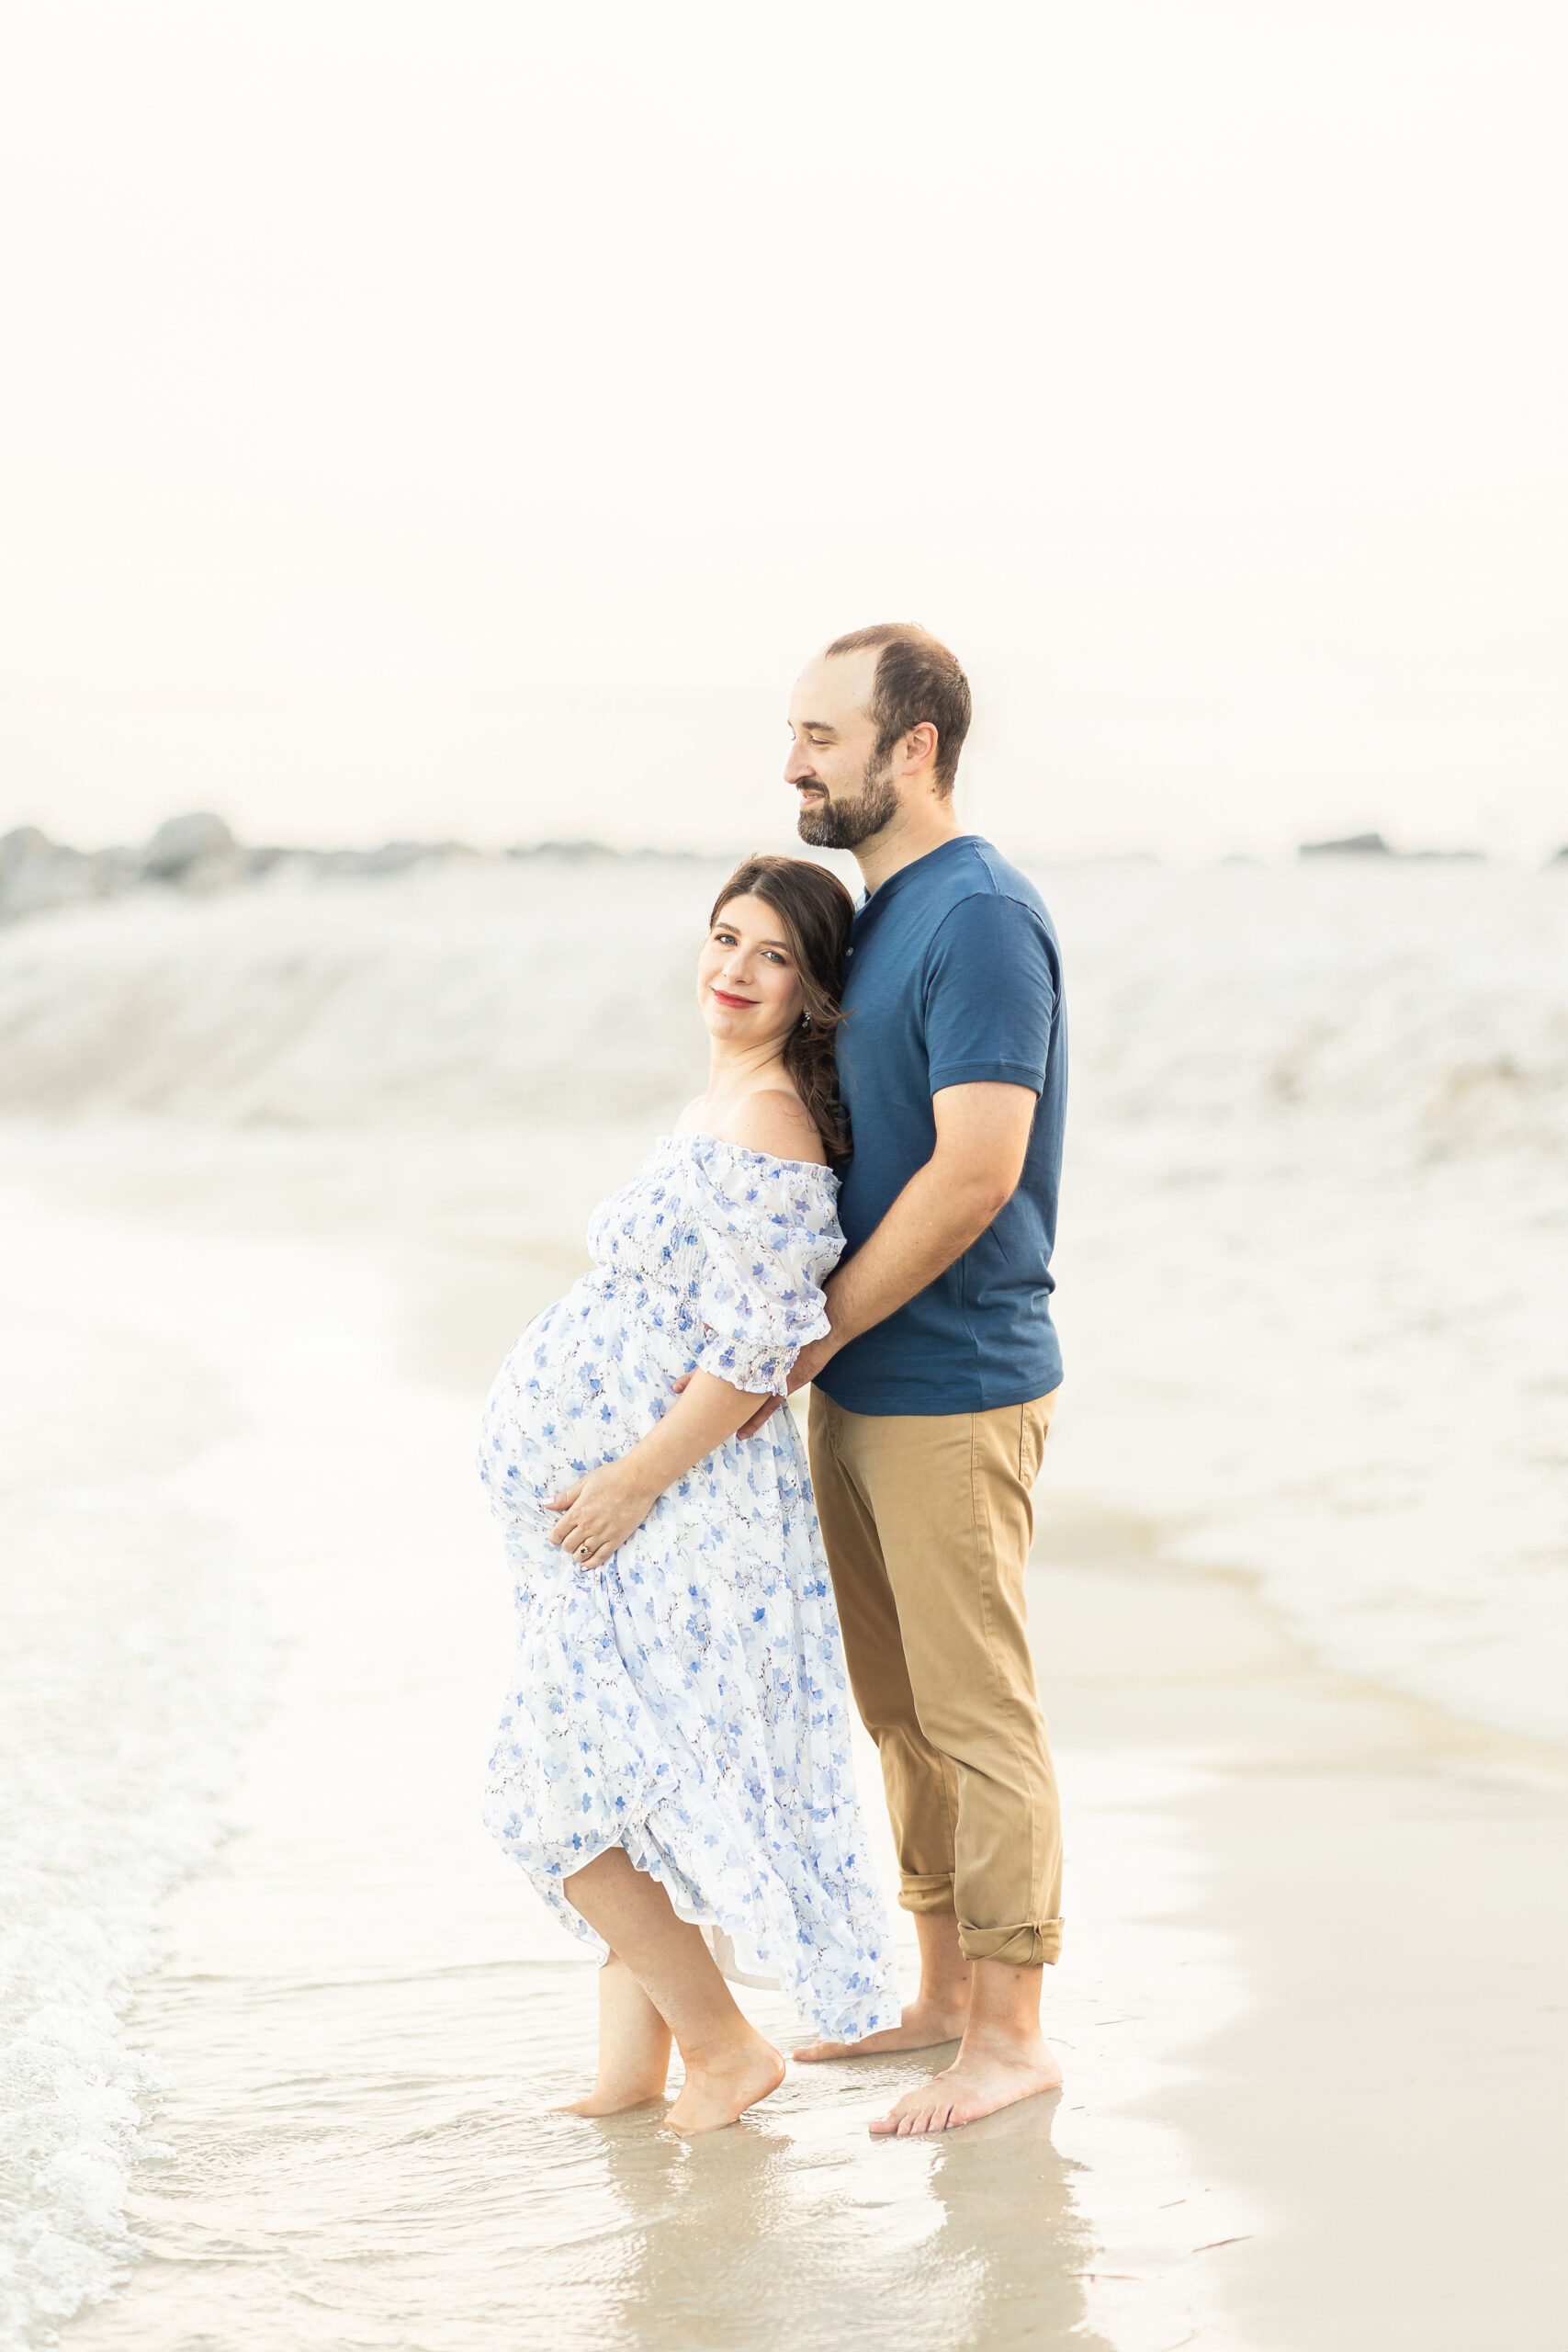 A mom to be leans into her husband while standing in the water on a beach in a blue floral dress after miami prenatal massage